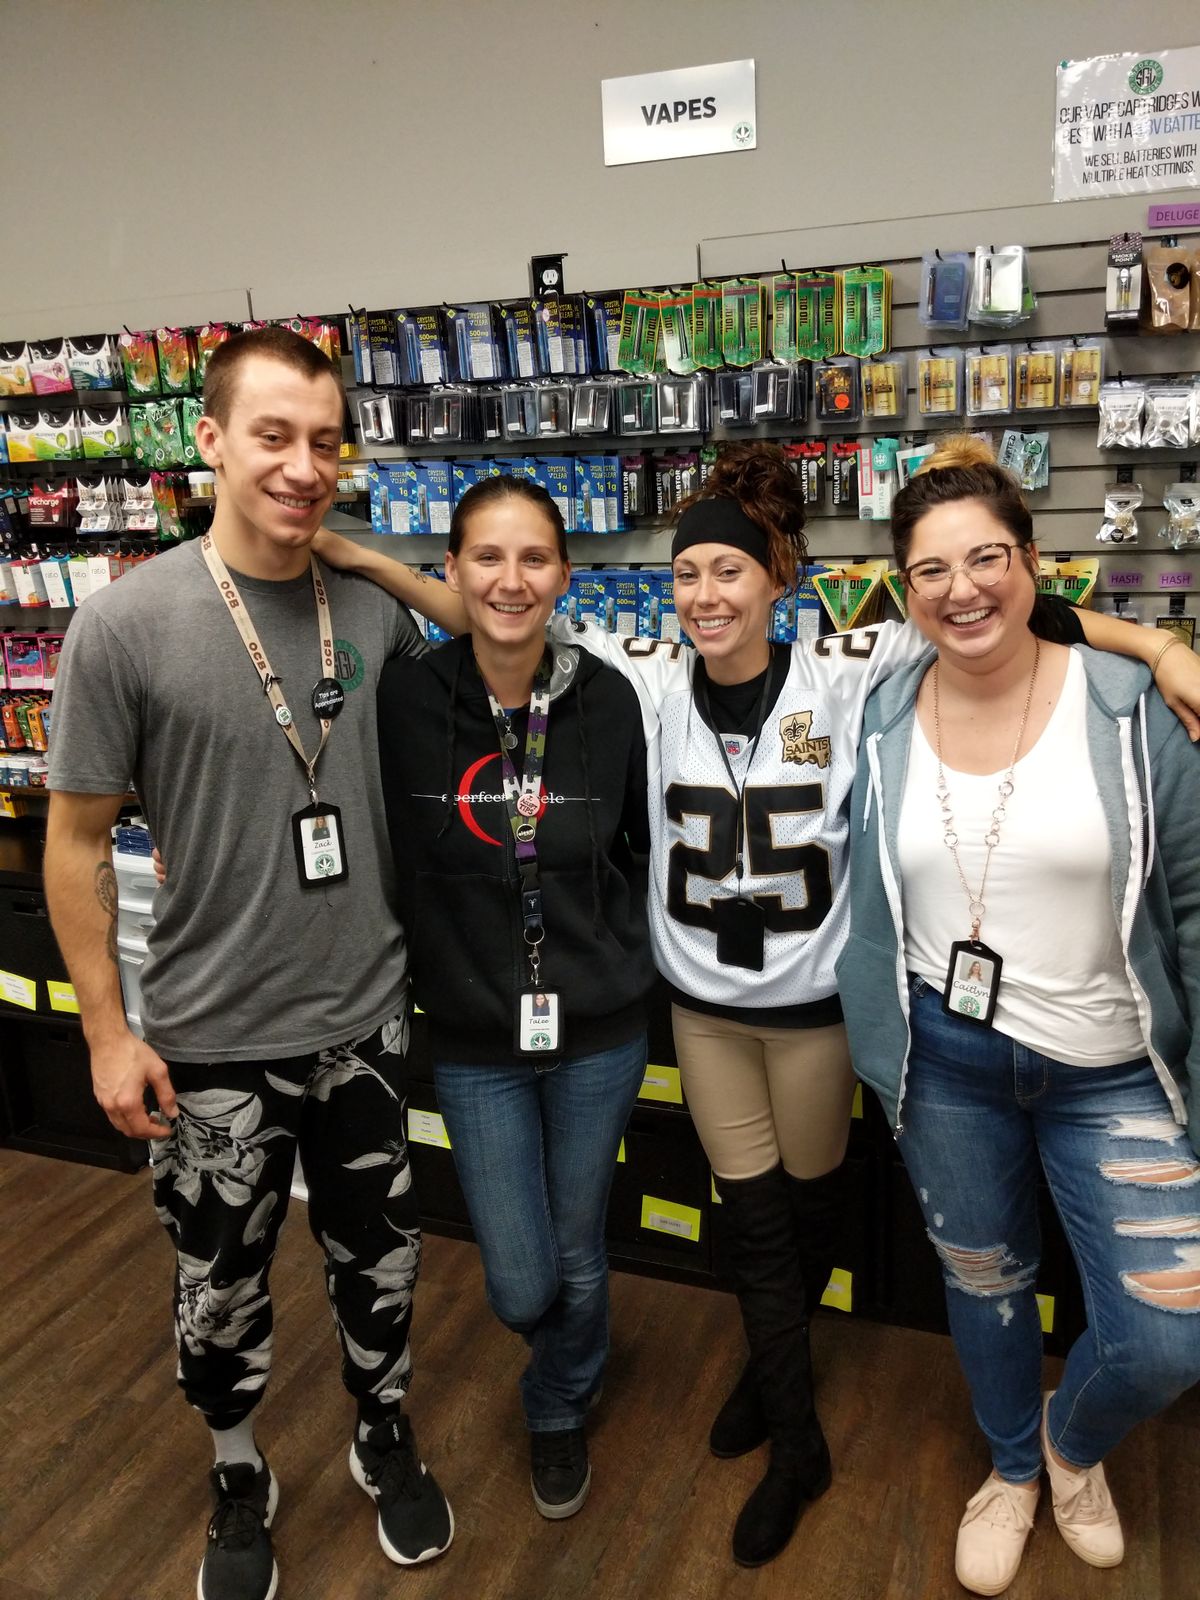 Spokane Green Leaf was the first recreational cannabis shop to open in Washington. Budtenders include, from left, Zack, Talee, Jessica and Caitlyn.  (Courtesy Spokane Green Leaf)